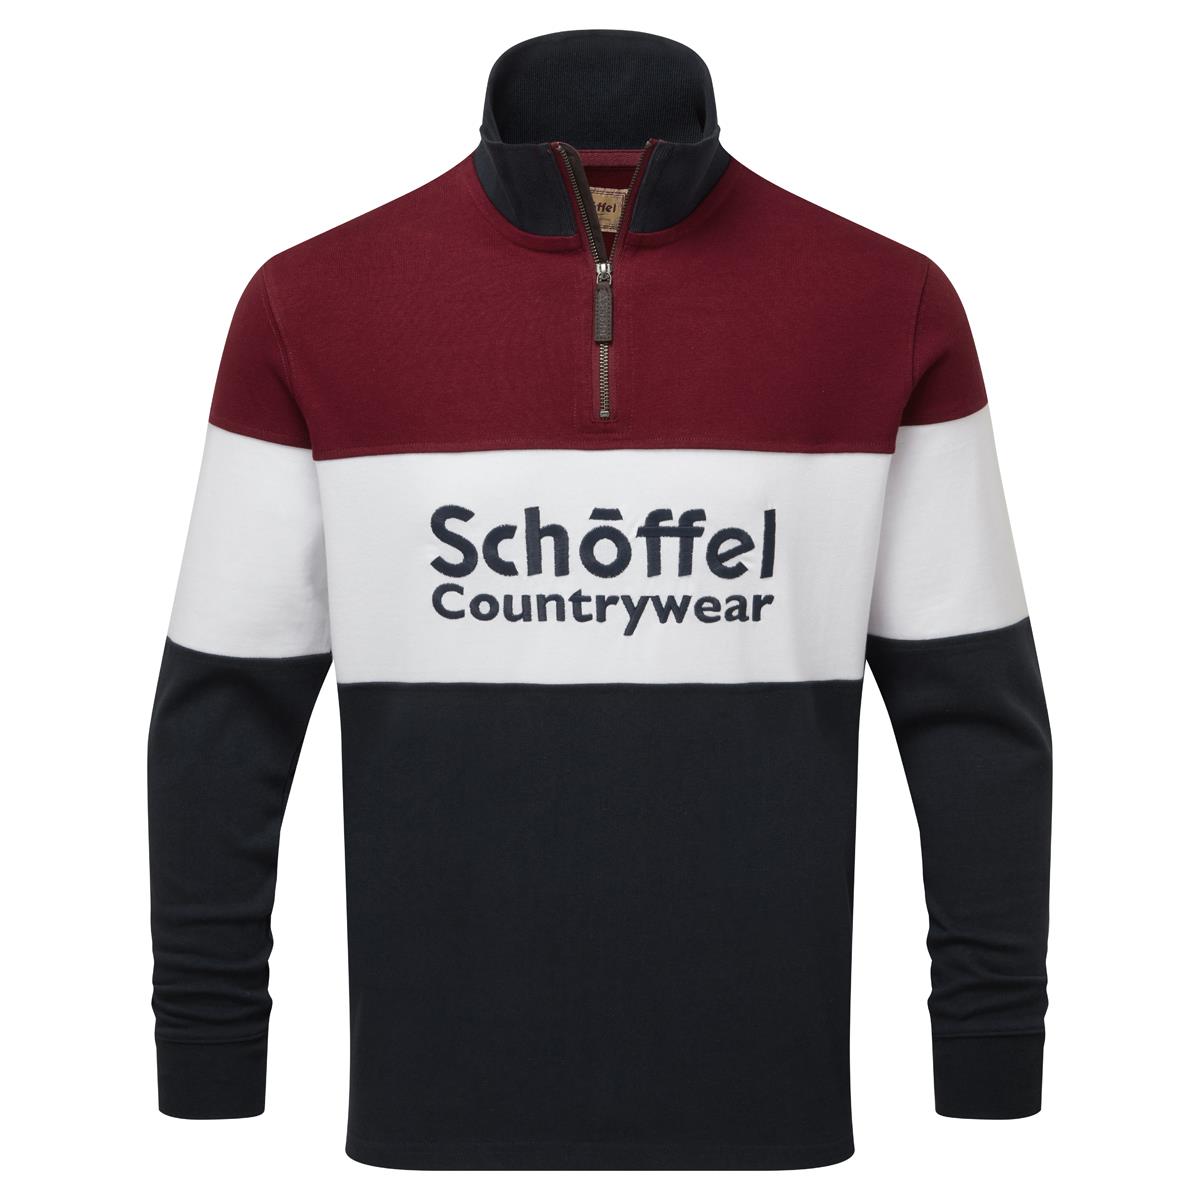 Schoffel Exeter Heritage 1/4 Zip Unisex Questions & Answers